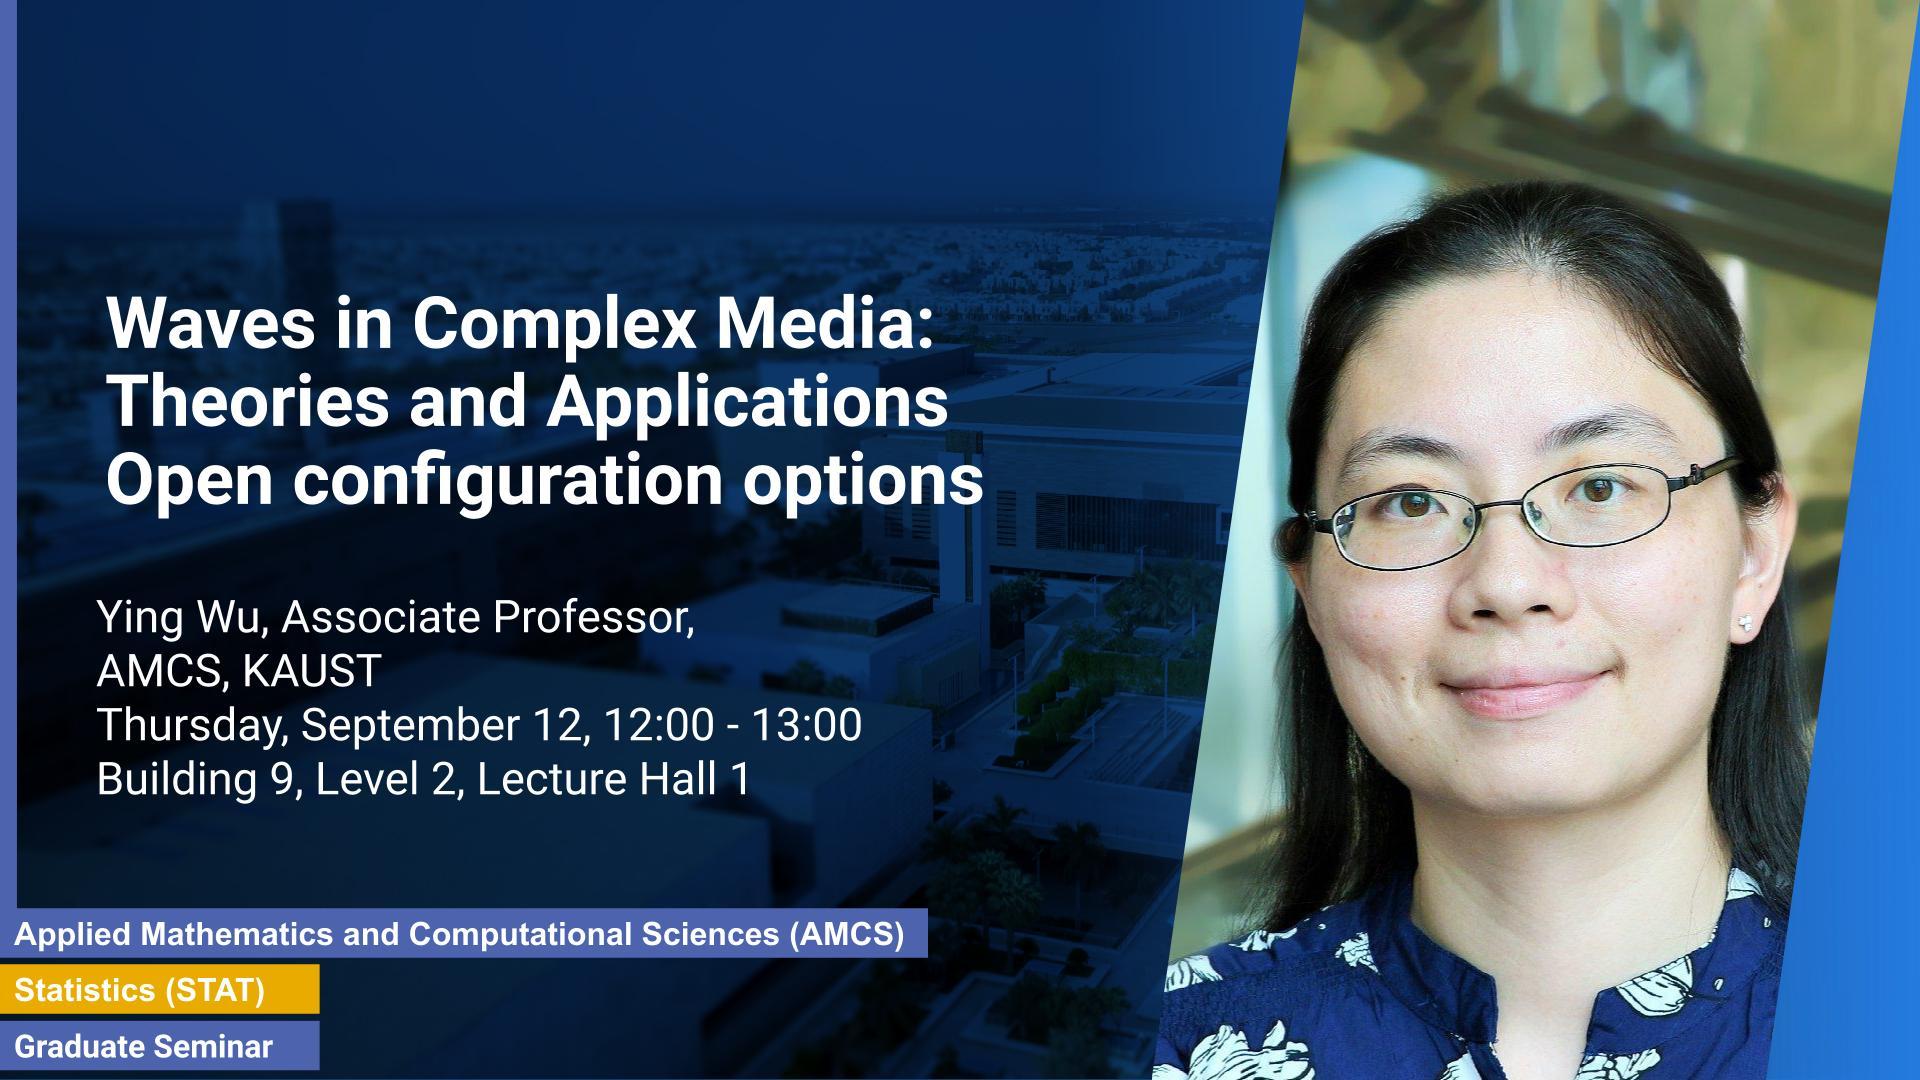 KAUST CEMSE AMCS STAT Graduate Seminar Ying Wu waves in complex media